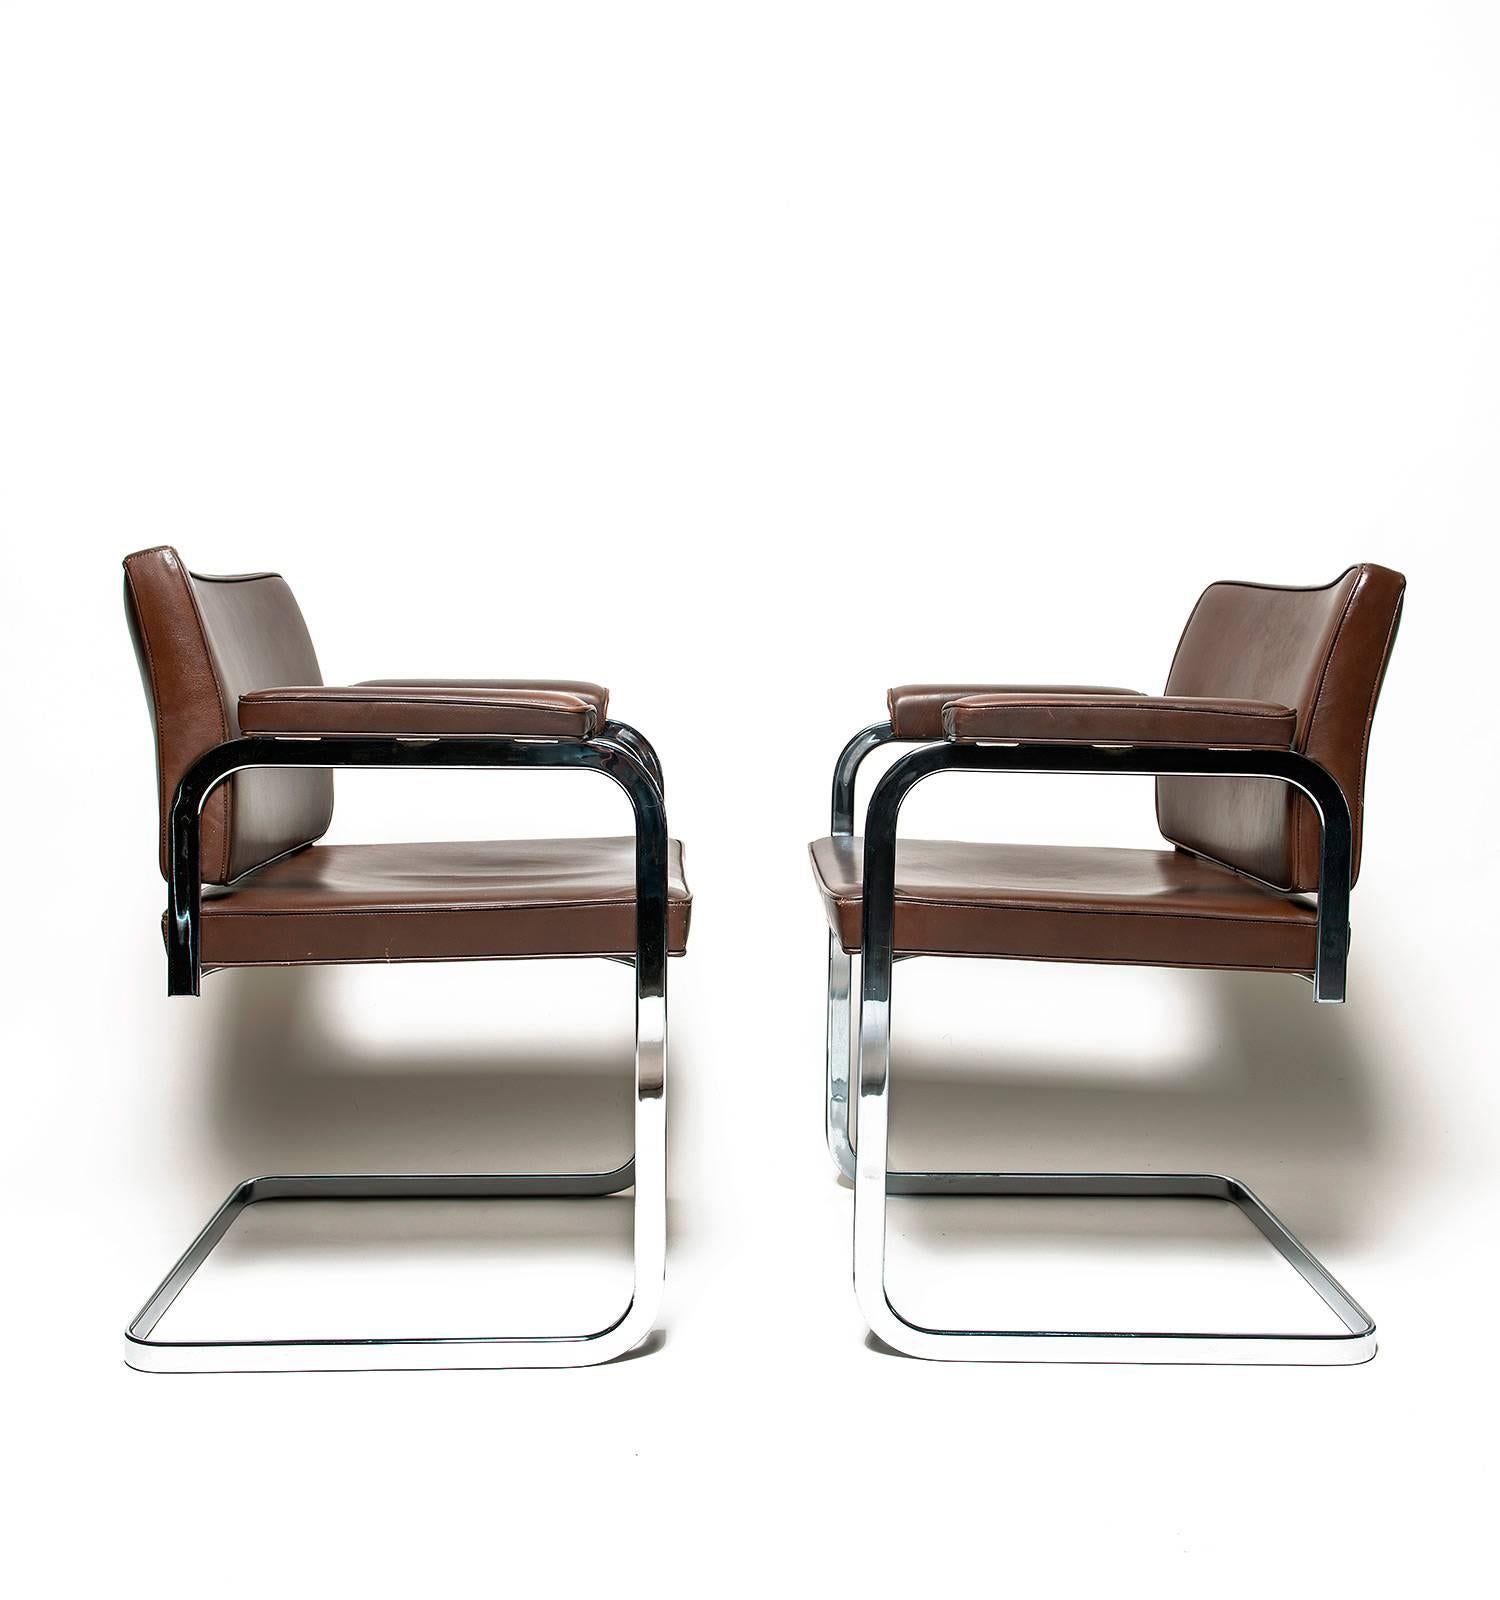 A pair of Bauhaus-style cantilever chairs by Swiss architect and designer, Robert Haussmann. Similar to his Unesco chair design, this pair feature smooth leather upholstery on a polished chrome base. Excellent vintage condition with minimal marks of